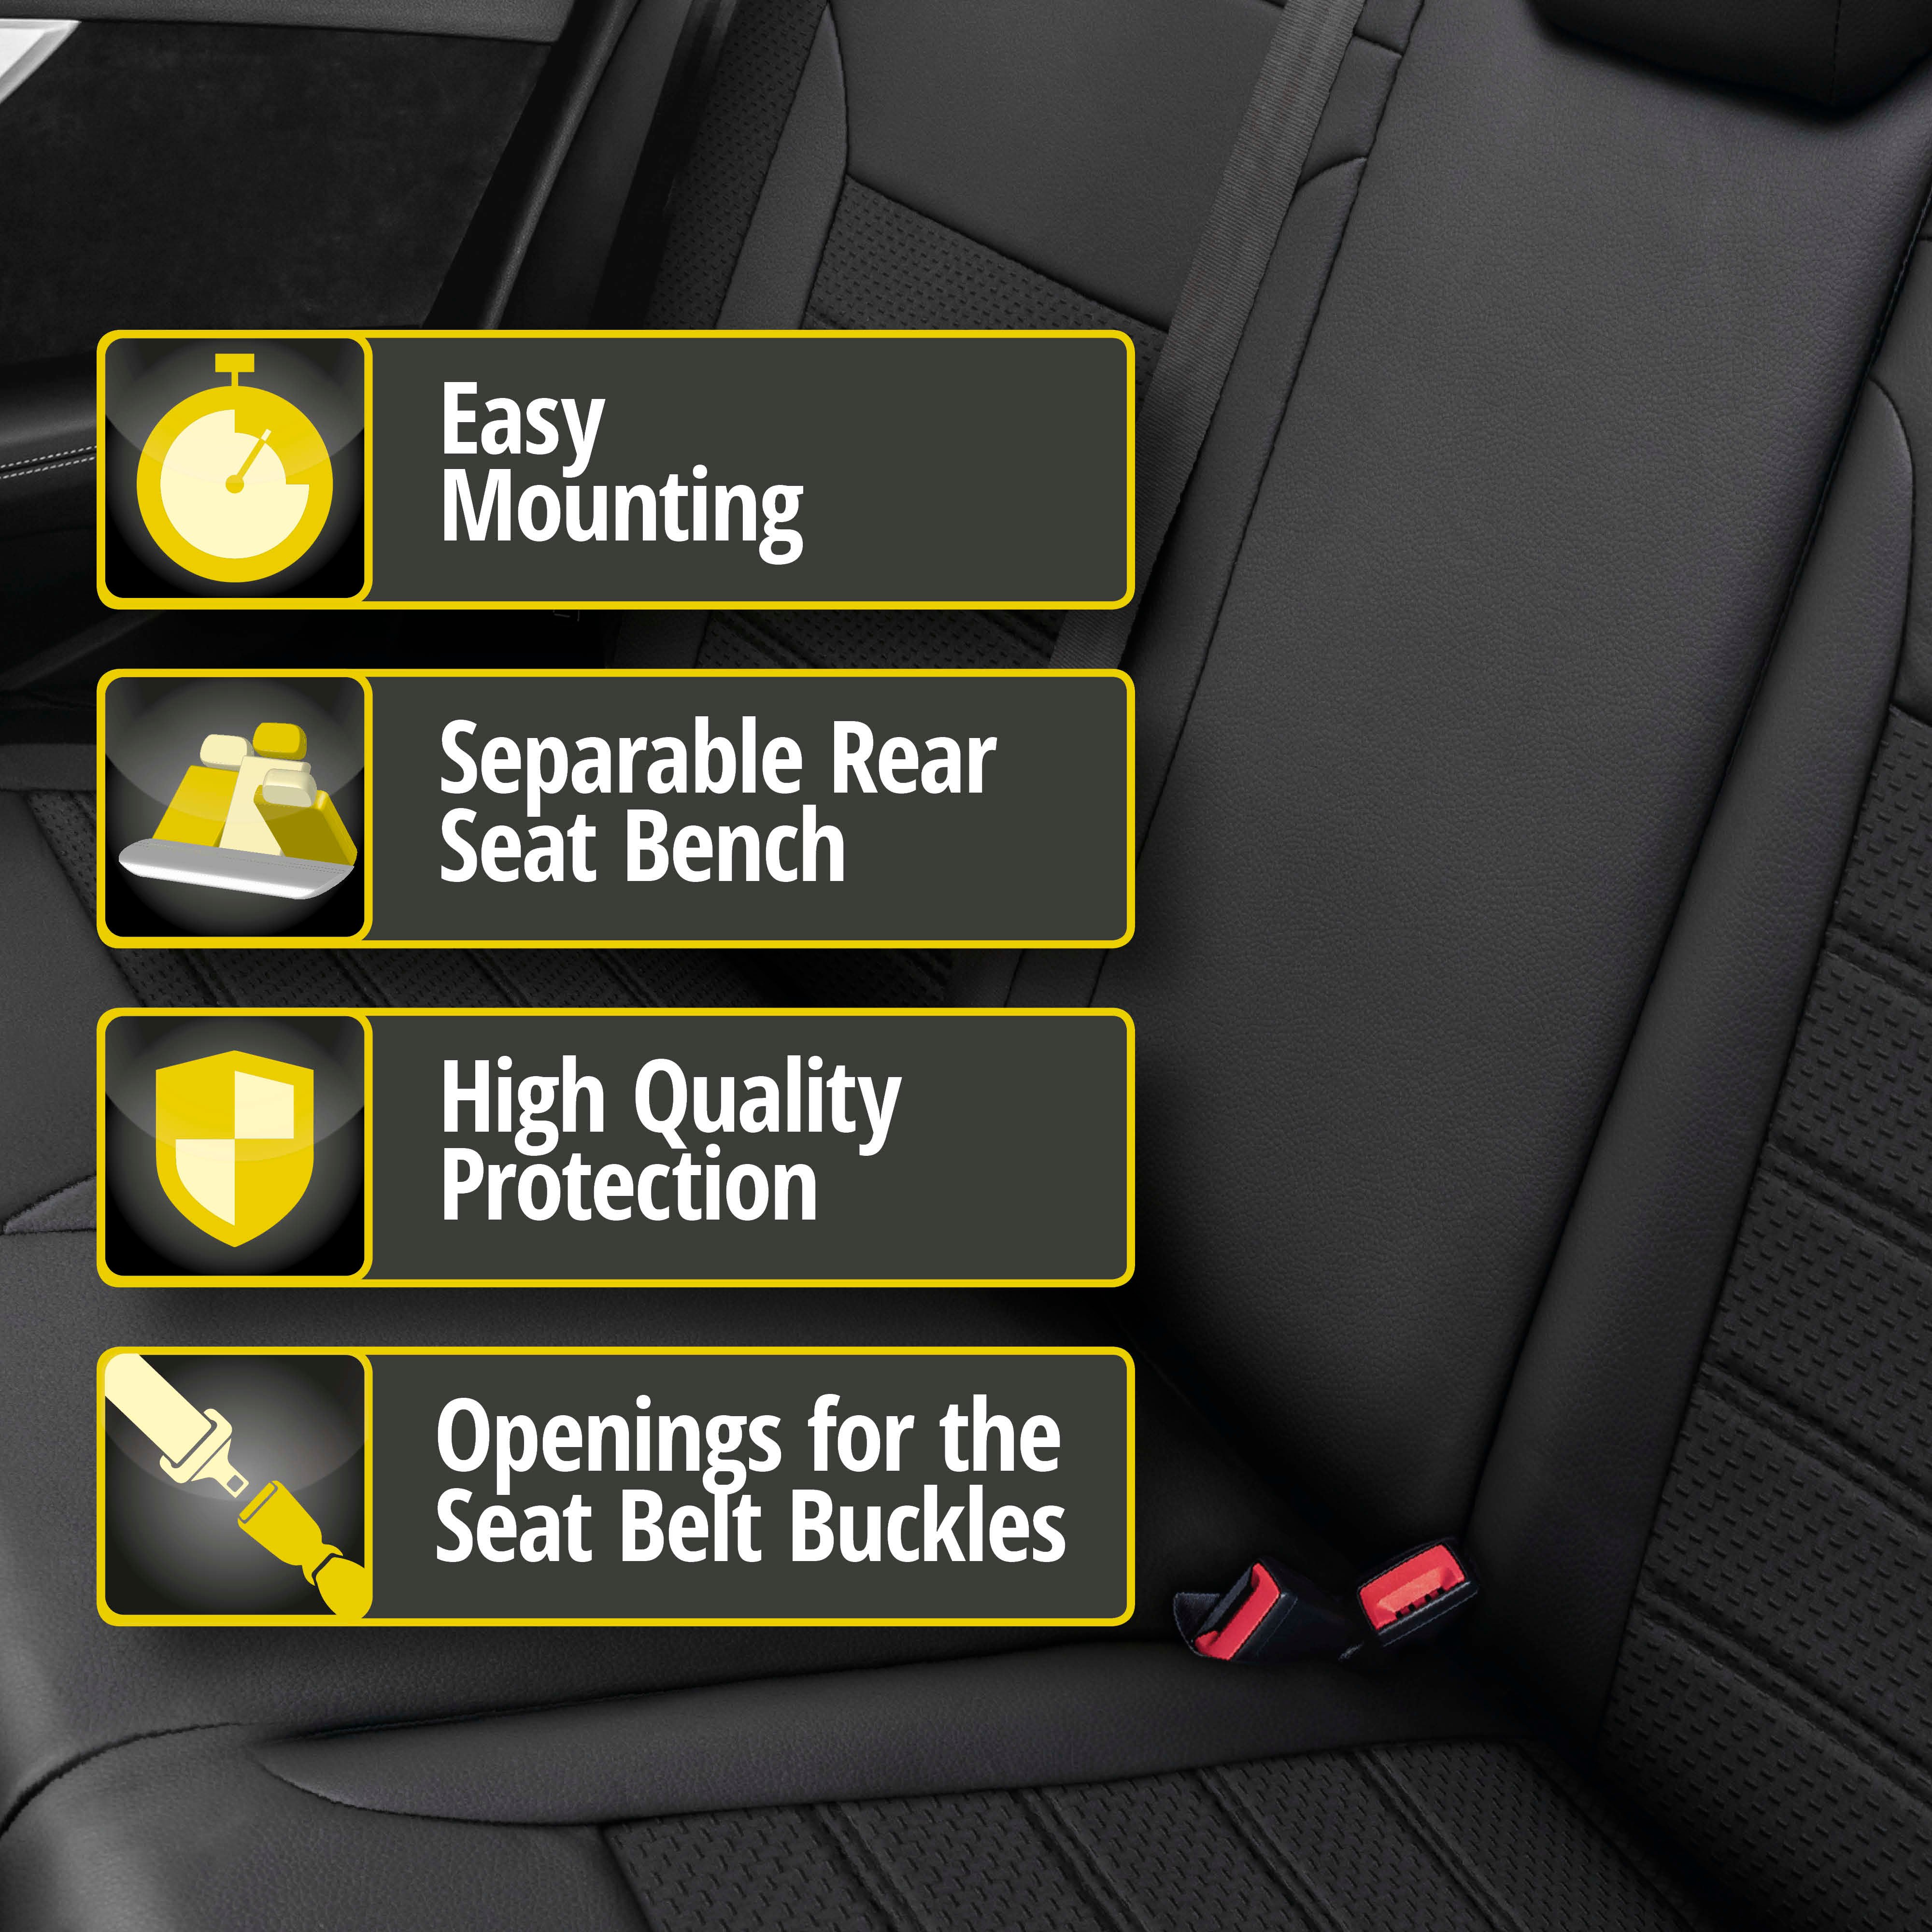 Seat cover Expedit for VW Passat Trendline 2015 until Today - 1 rear Seat cover for normal seats